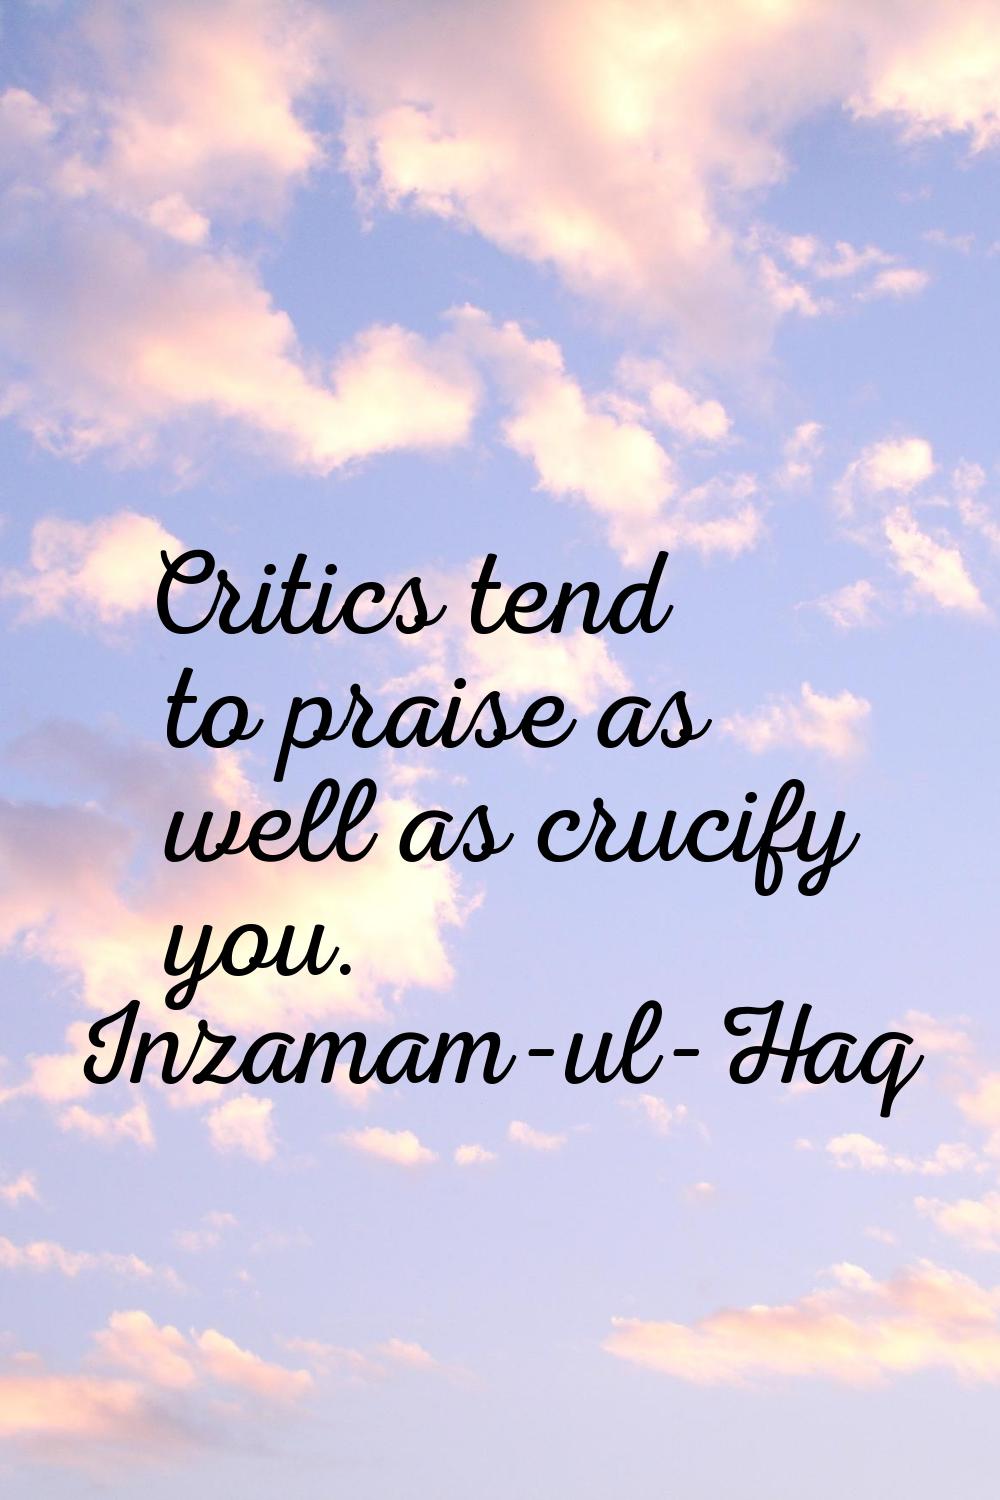 Critics tend to praise as well as crucify you.